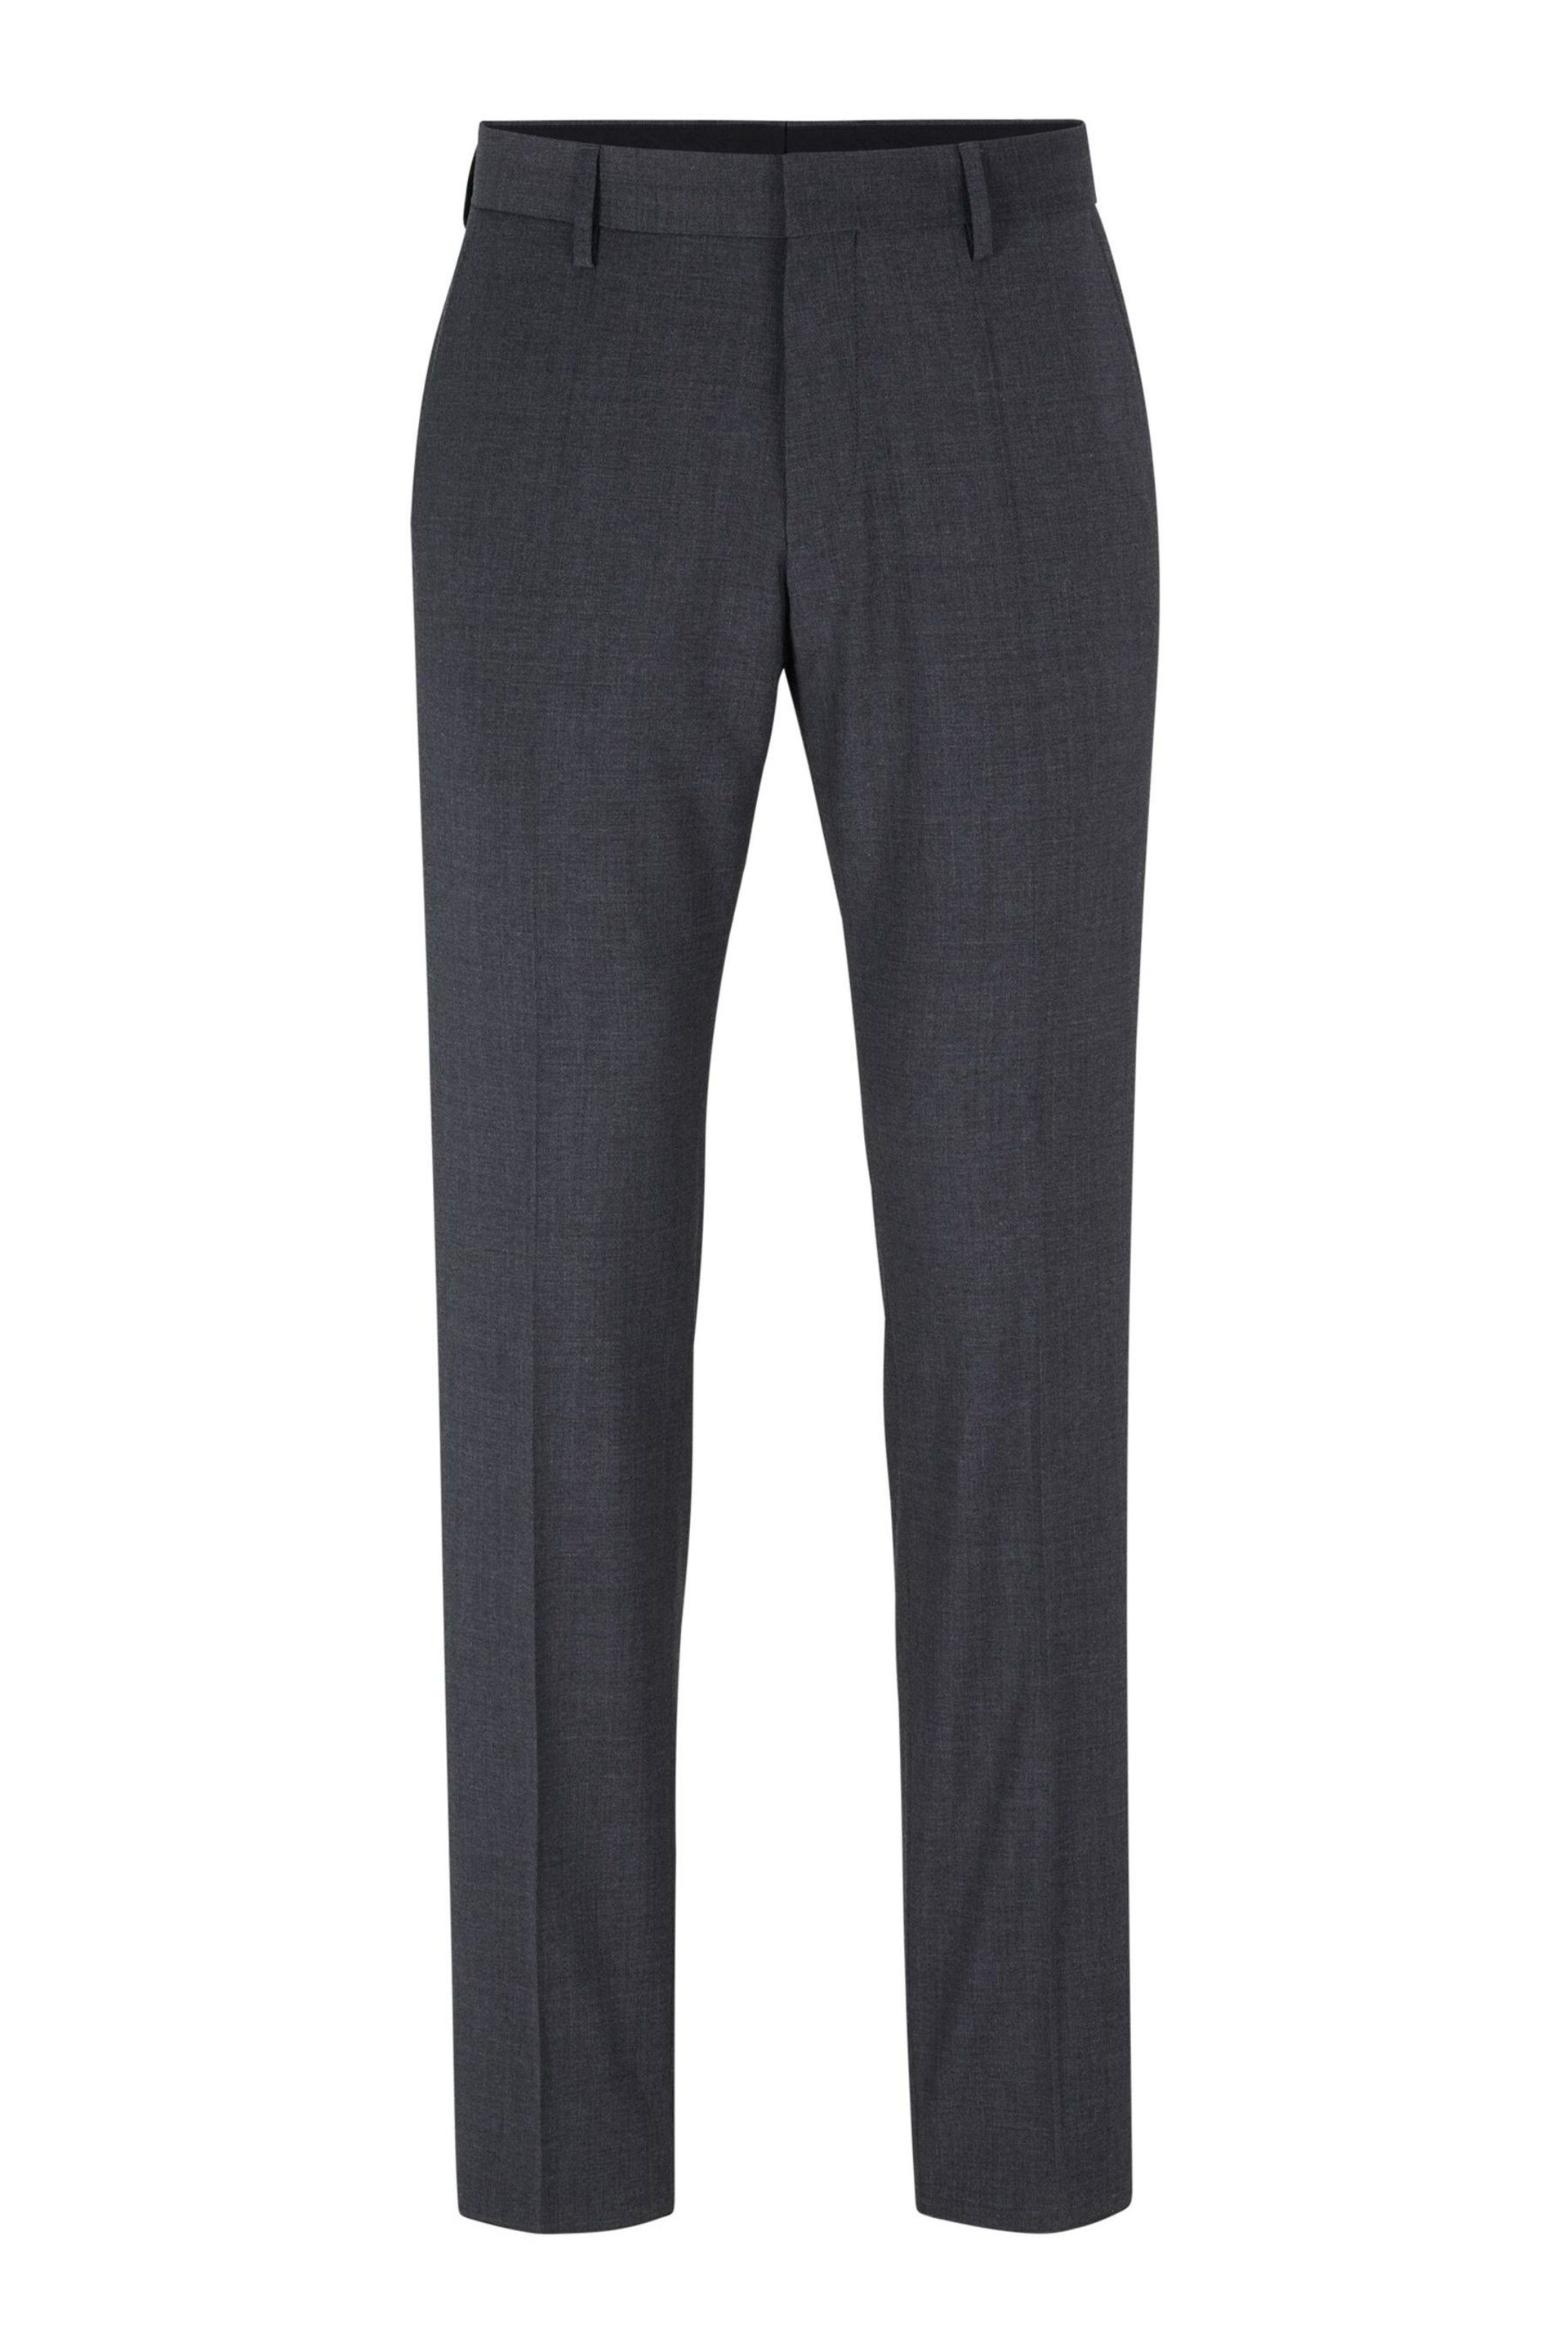 BOSS Grey Slim Fit Suit :Trousers - Image 6 of 6